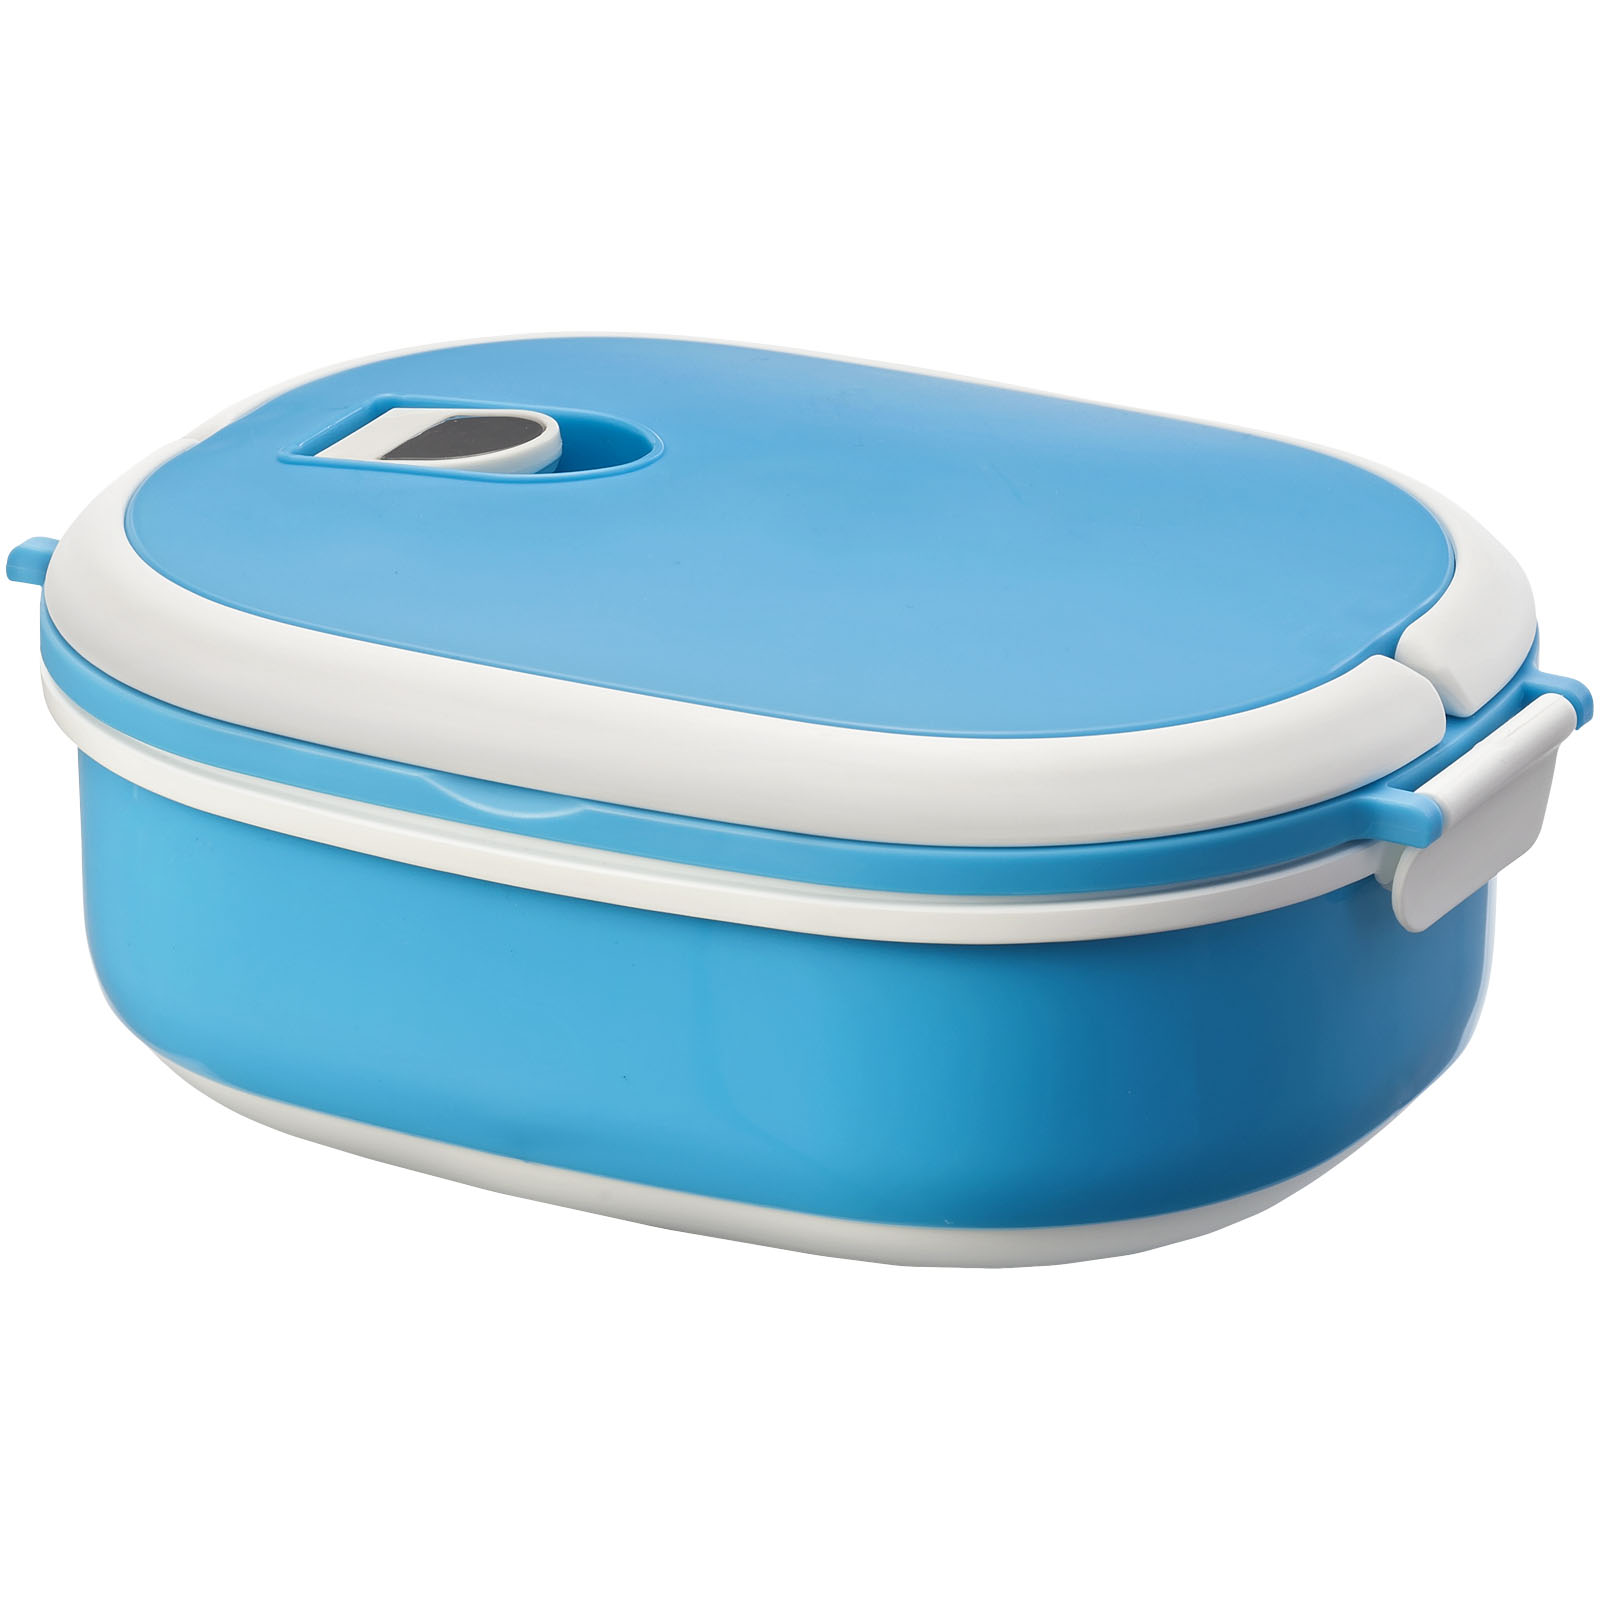 Advertising Lunch Boxes - Spiga 750 ml lunch box